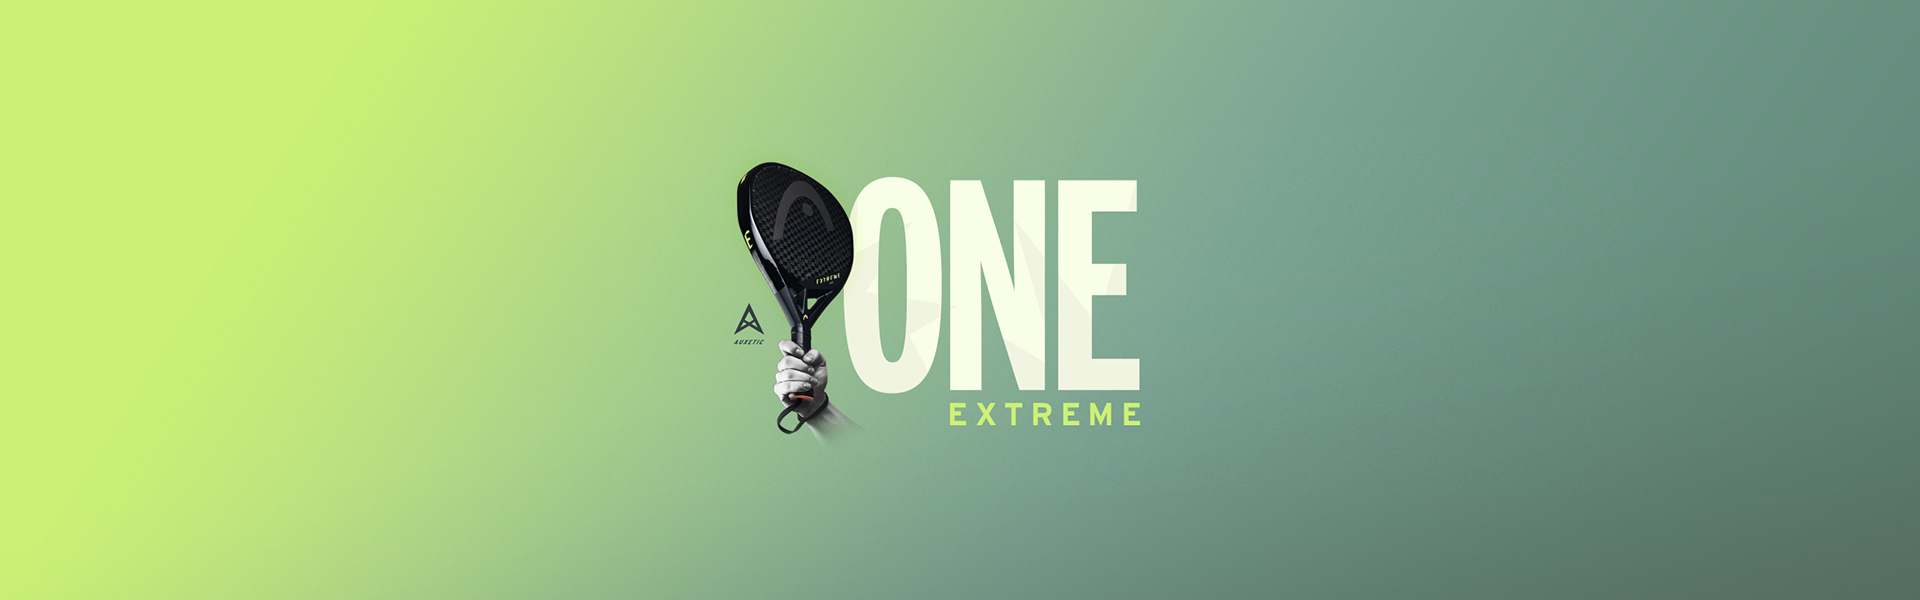 JOIN THE REVOLUTION AND DISCOVER OUR MOST ESPECIAL RACQUET: THE EXTREME ONE